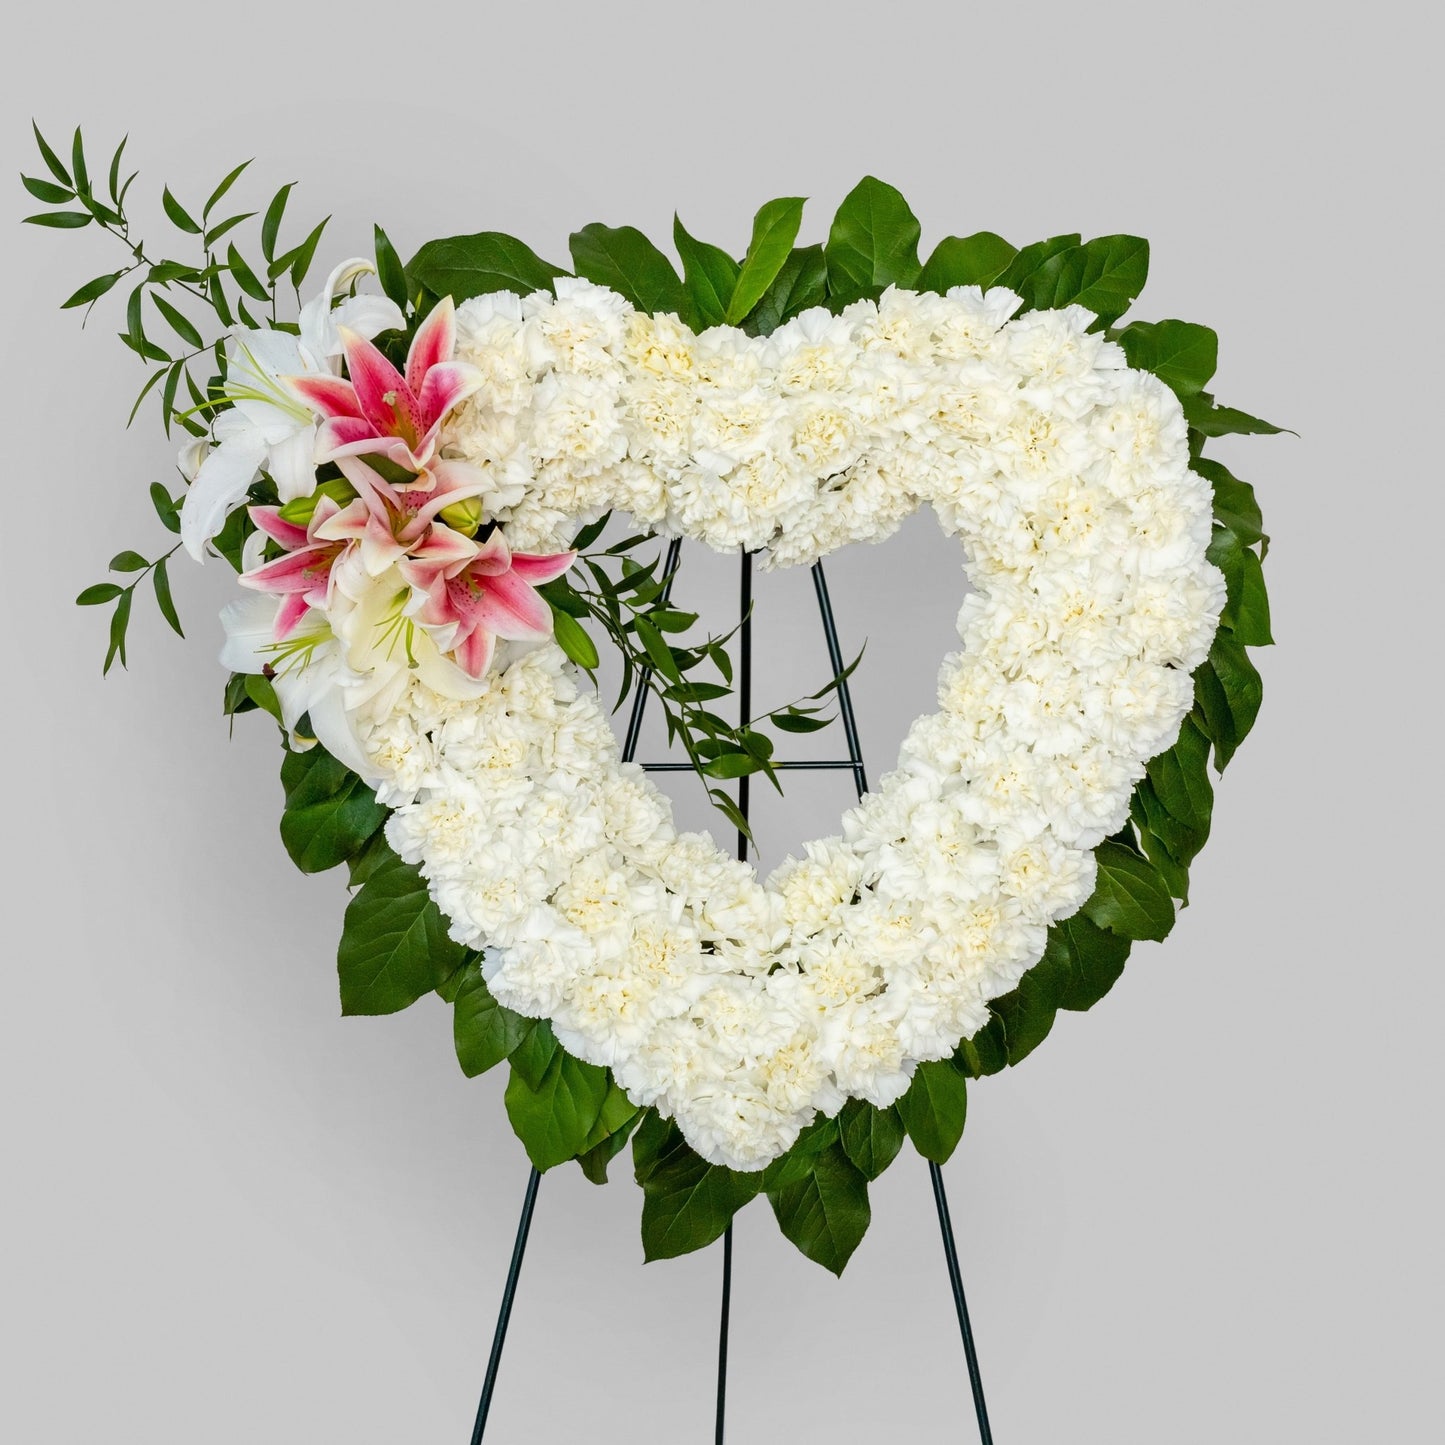 Funeral Open Heart ( White Carnations and Lilies)